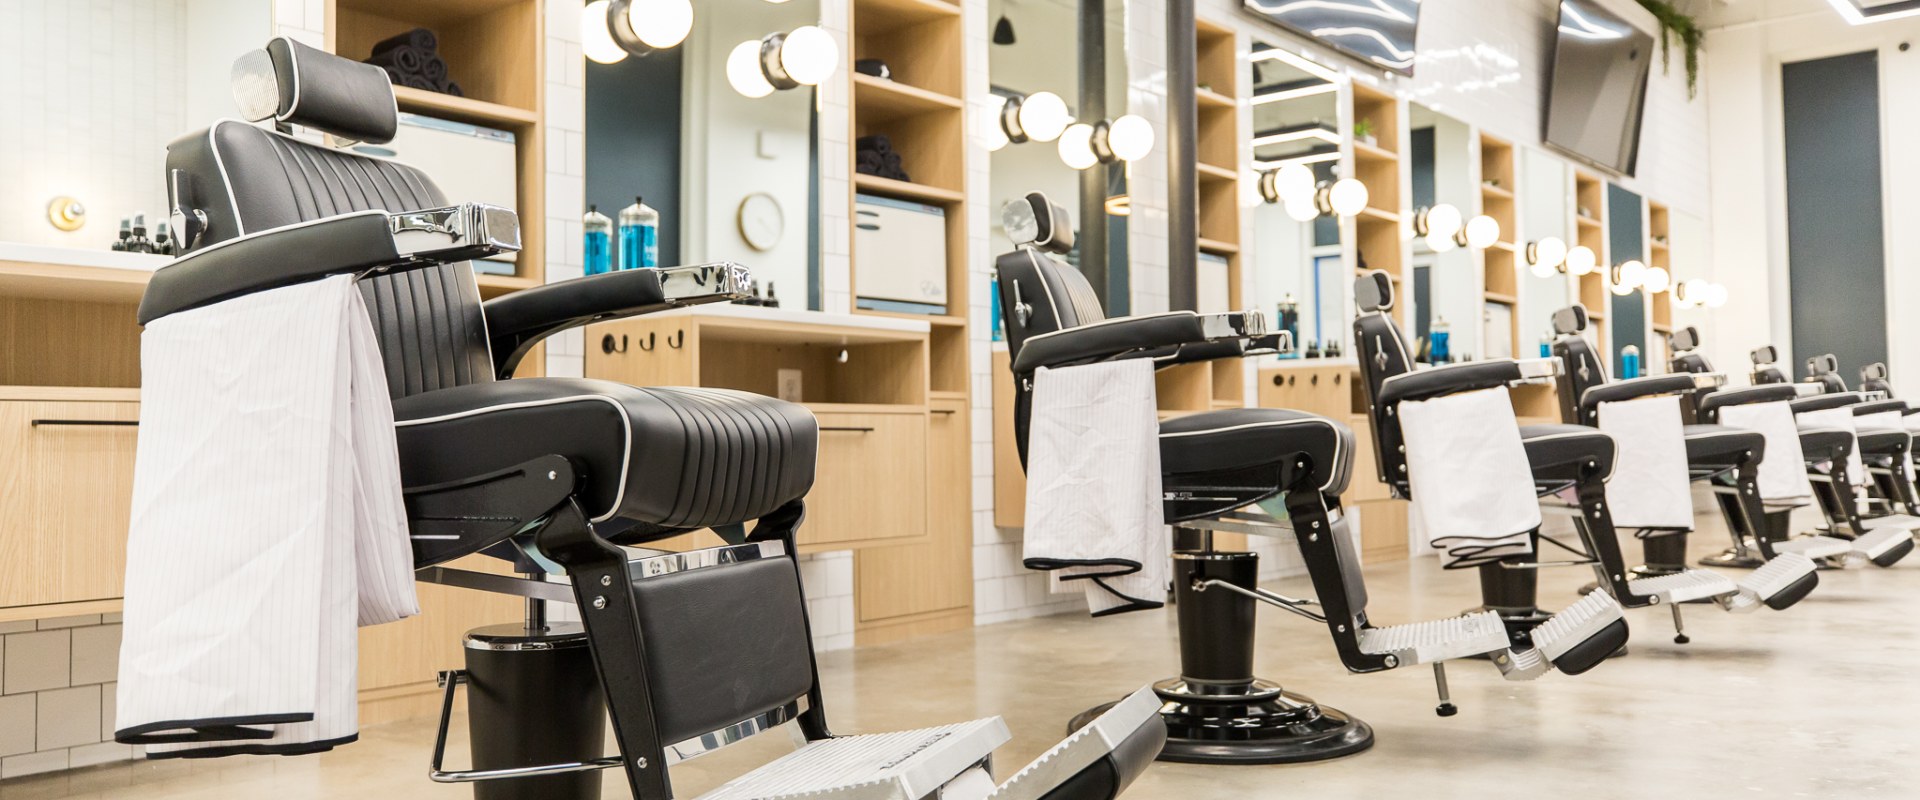 Discounts on Barber Shops in Washington DC - Get the Best Deals Now!